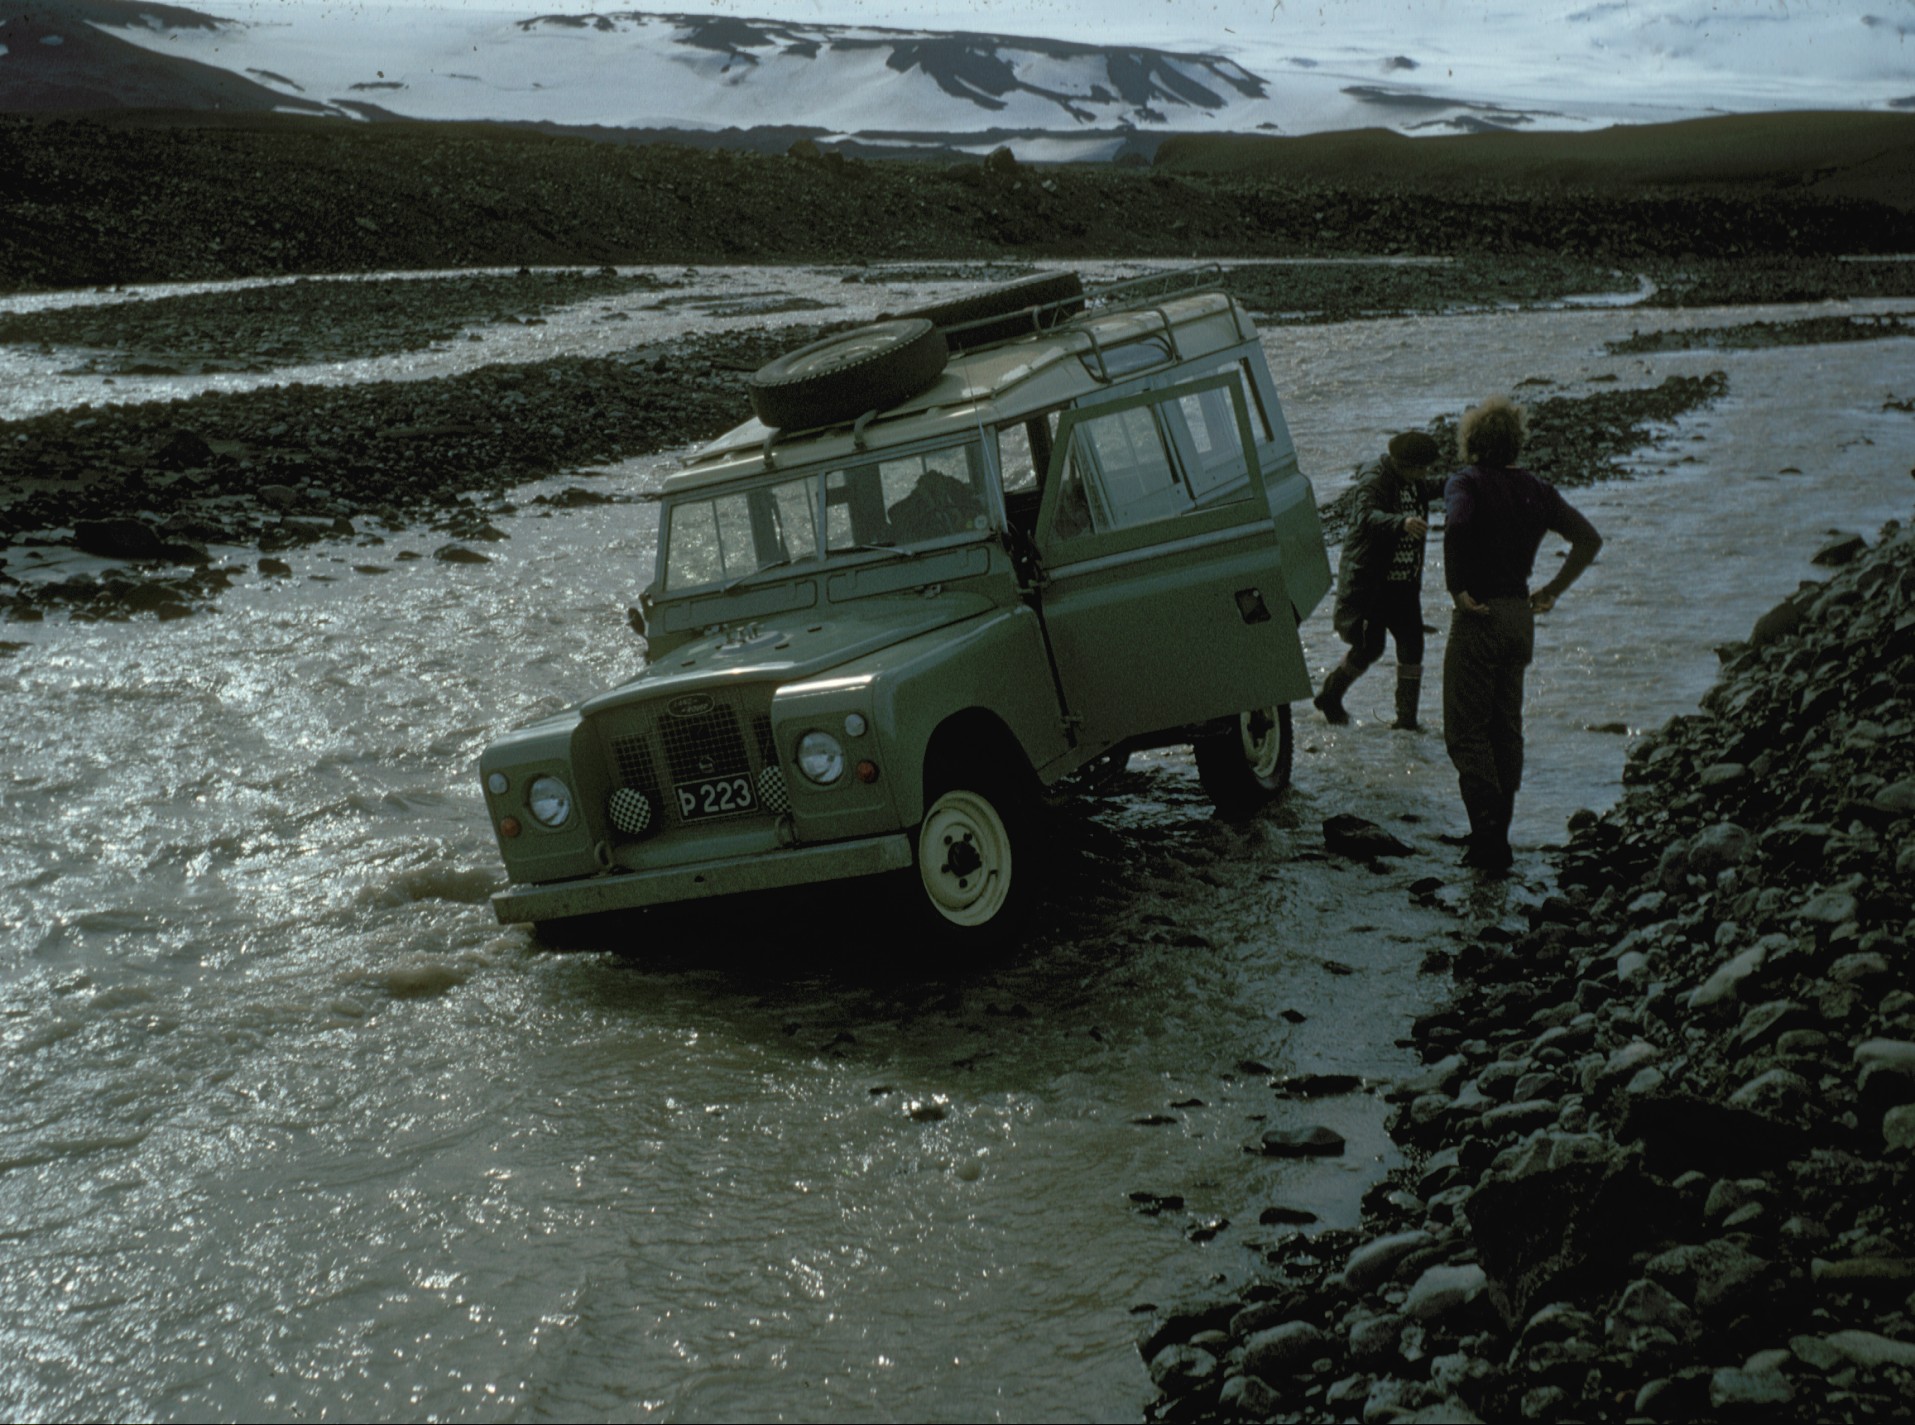 Image:Iceland car stuck in river 1972